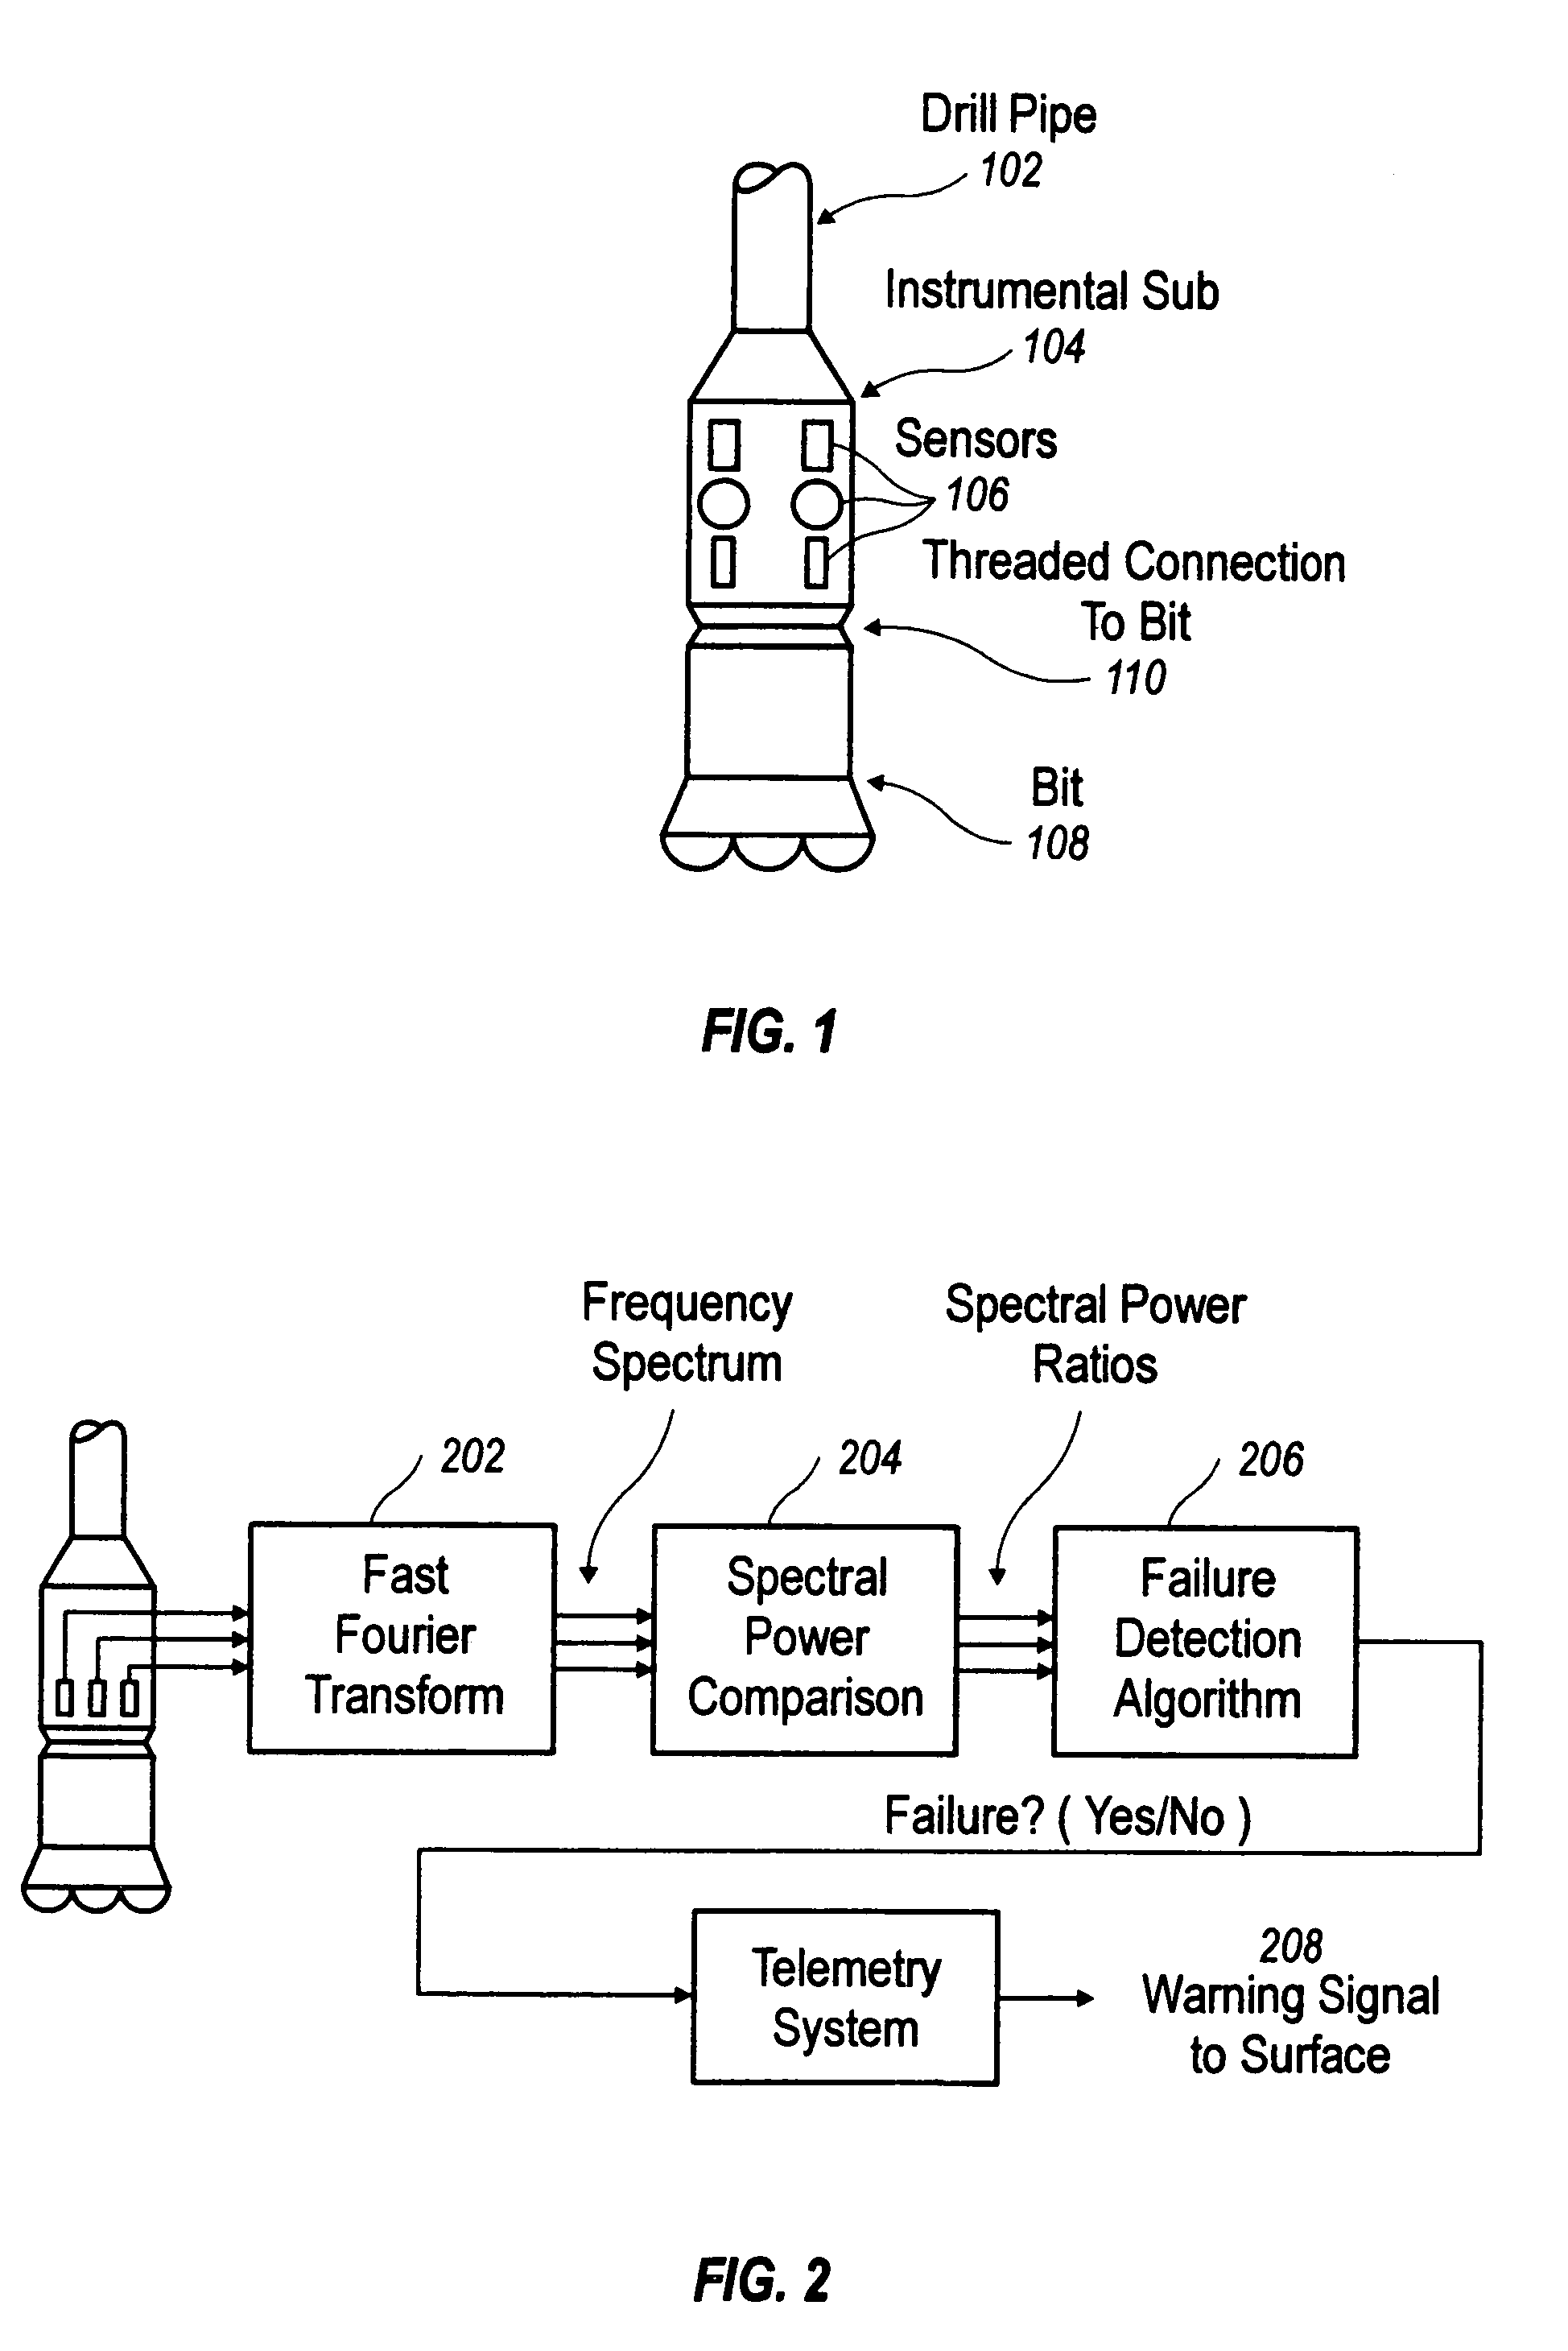 Method and apparatus for monitoring the condition of a downhole drill bit, and communicating the condition to the surface